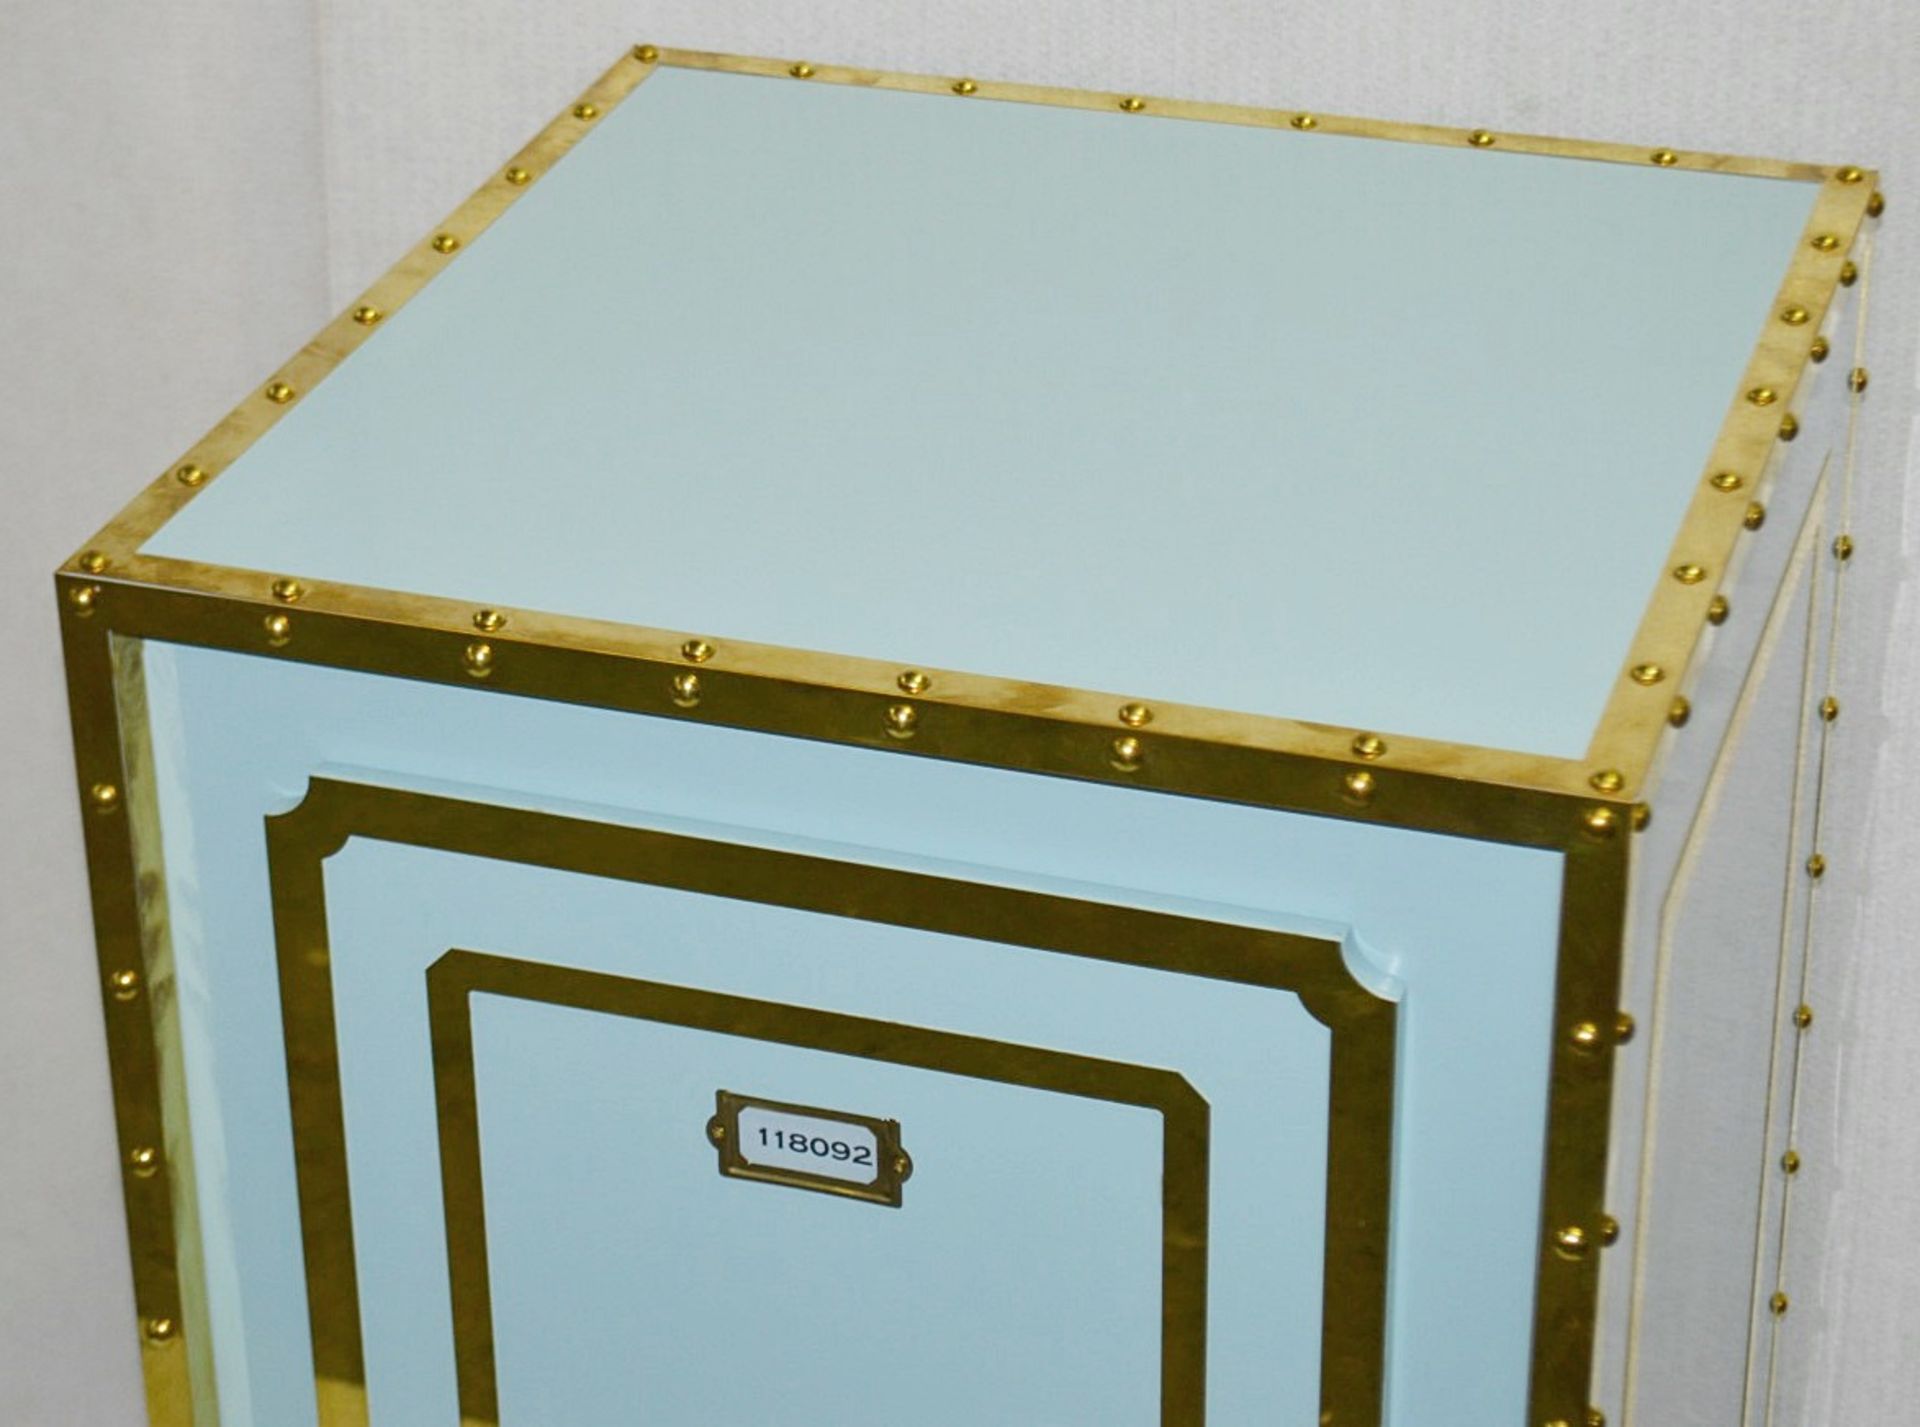 1 x Opulent Bank Vault Safe-style Shop Display Plinth In Tiffany Blue With Gold Trim - Image 2 of 6